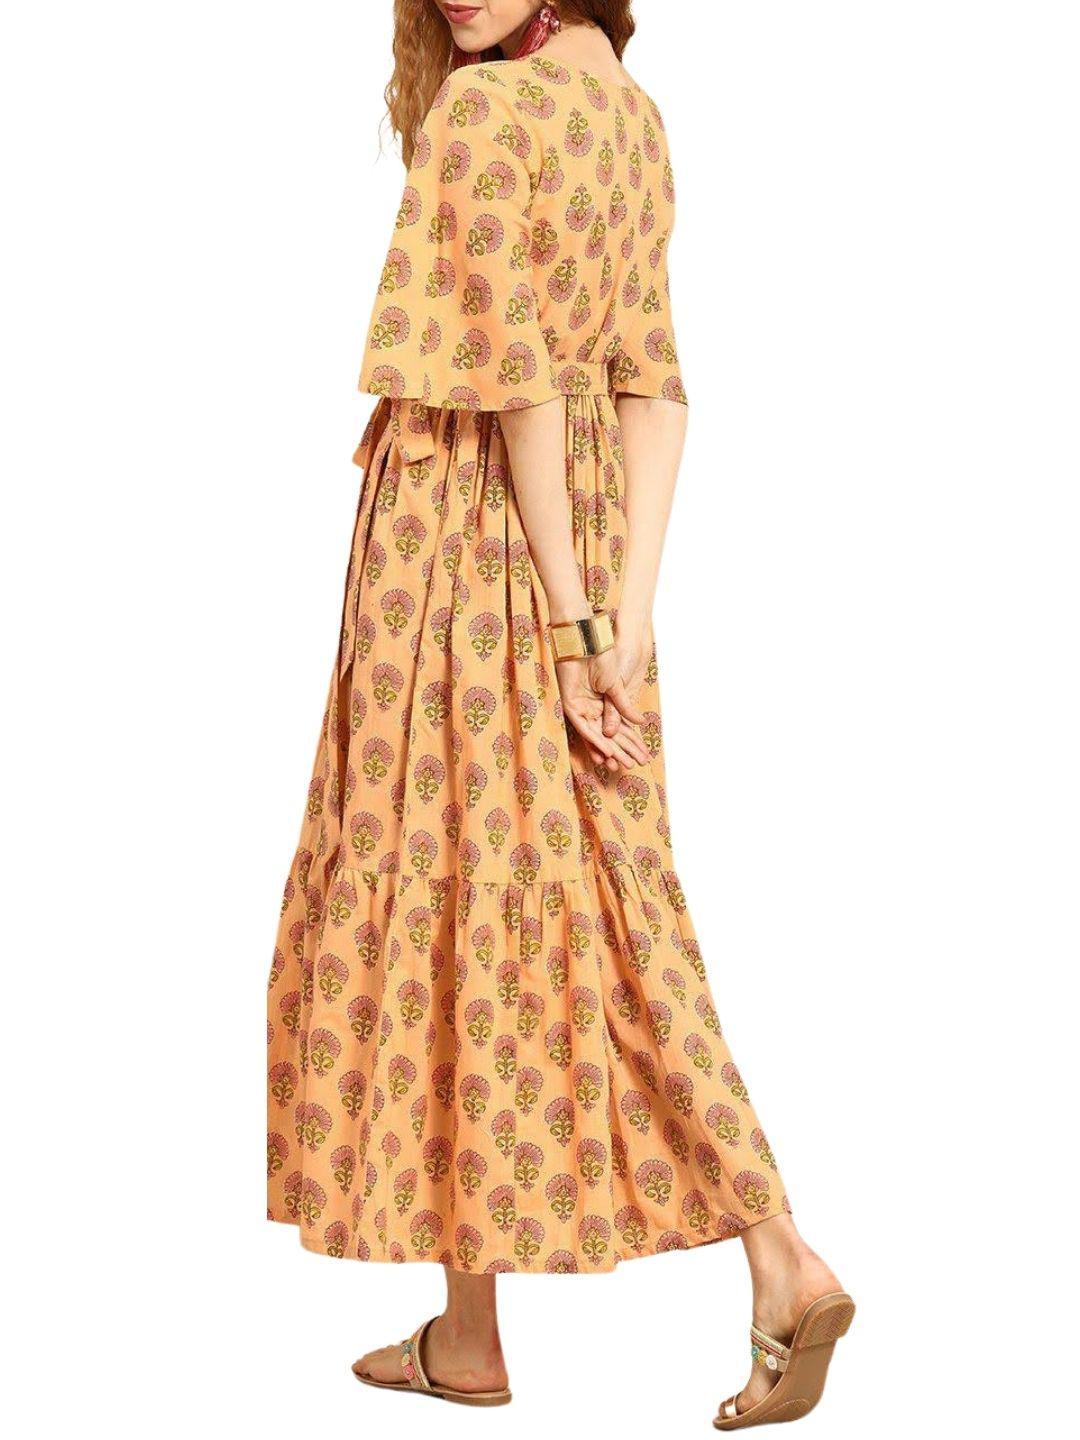 peach-colored-printed-fit-and-flare-dress-10804001PC, Women Clothing, Cotton Dress